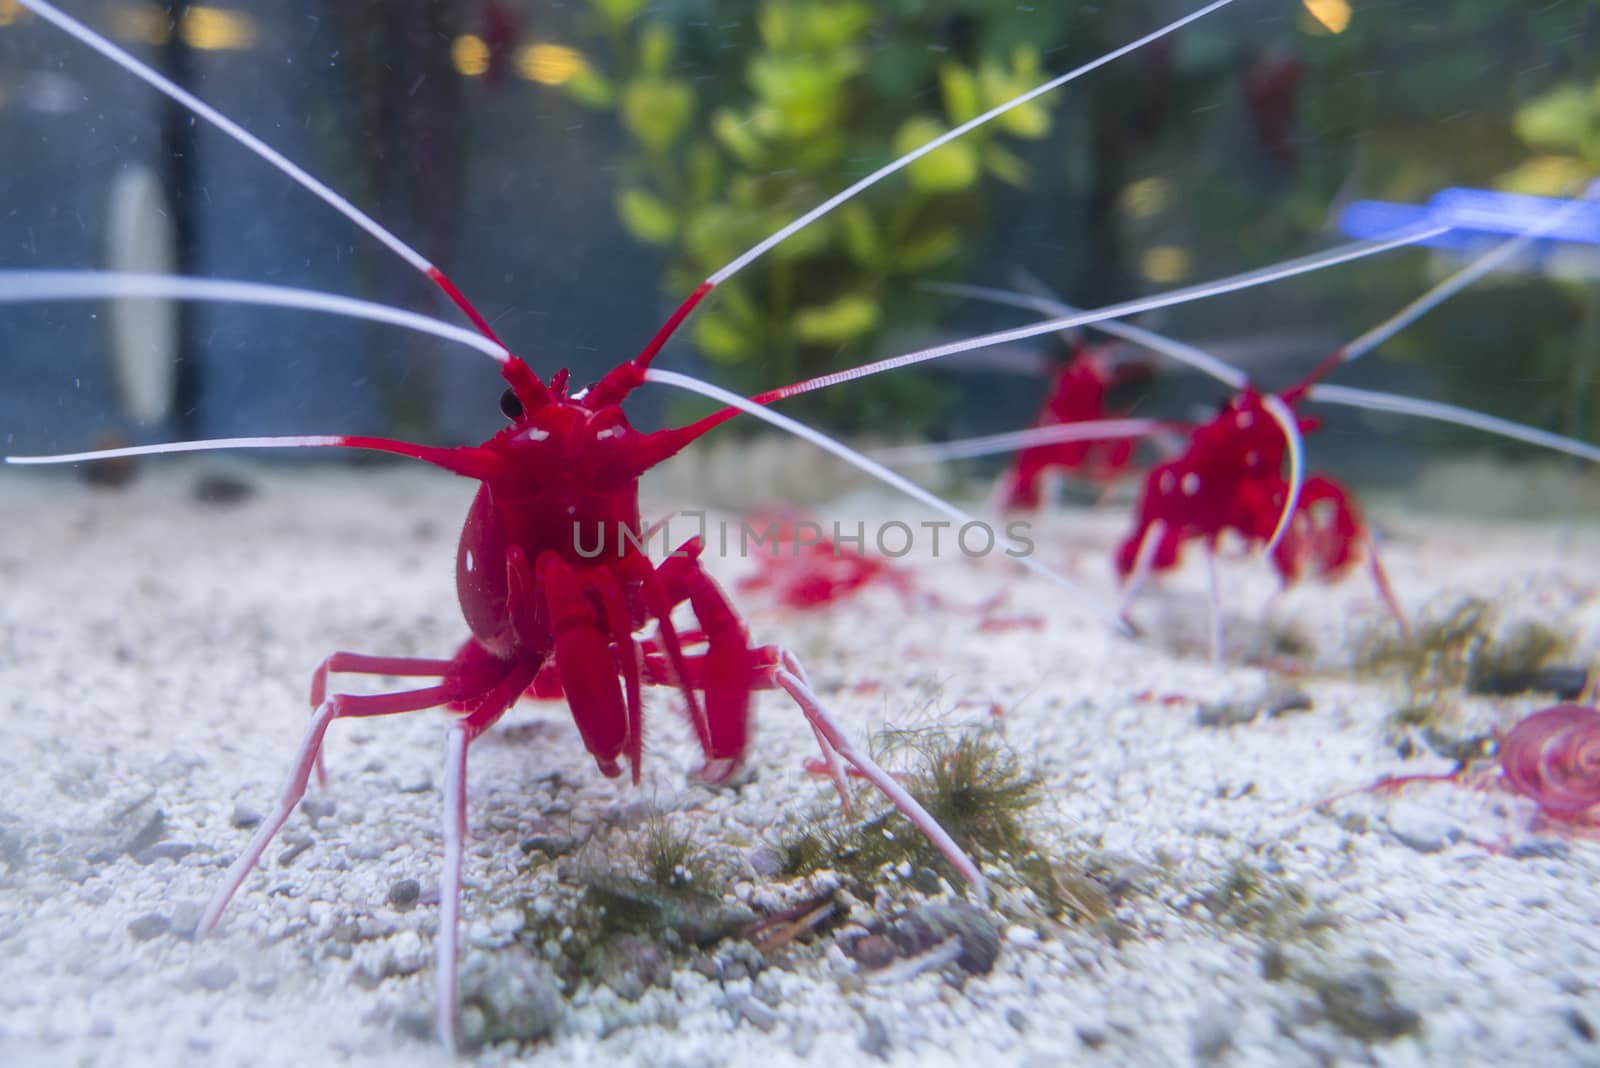 Fire cleaner shrimp, Lysmata debelius. by AlessandroZocc